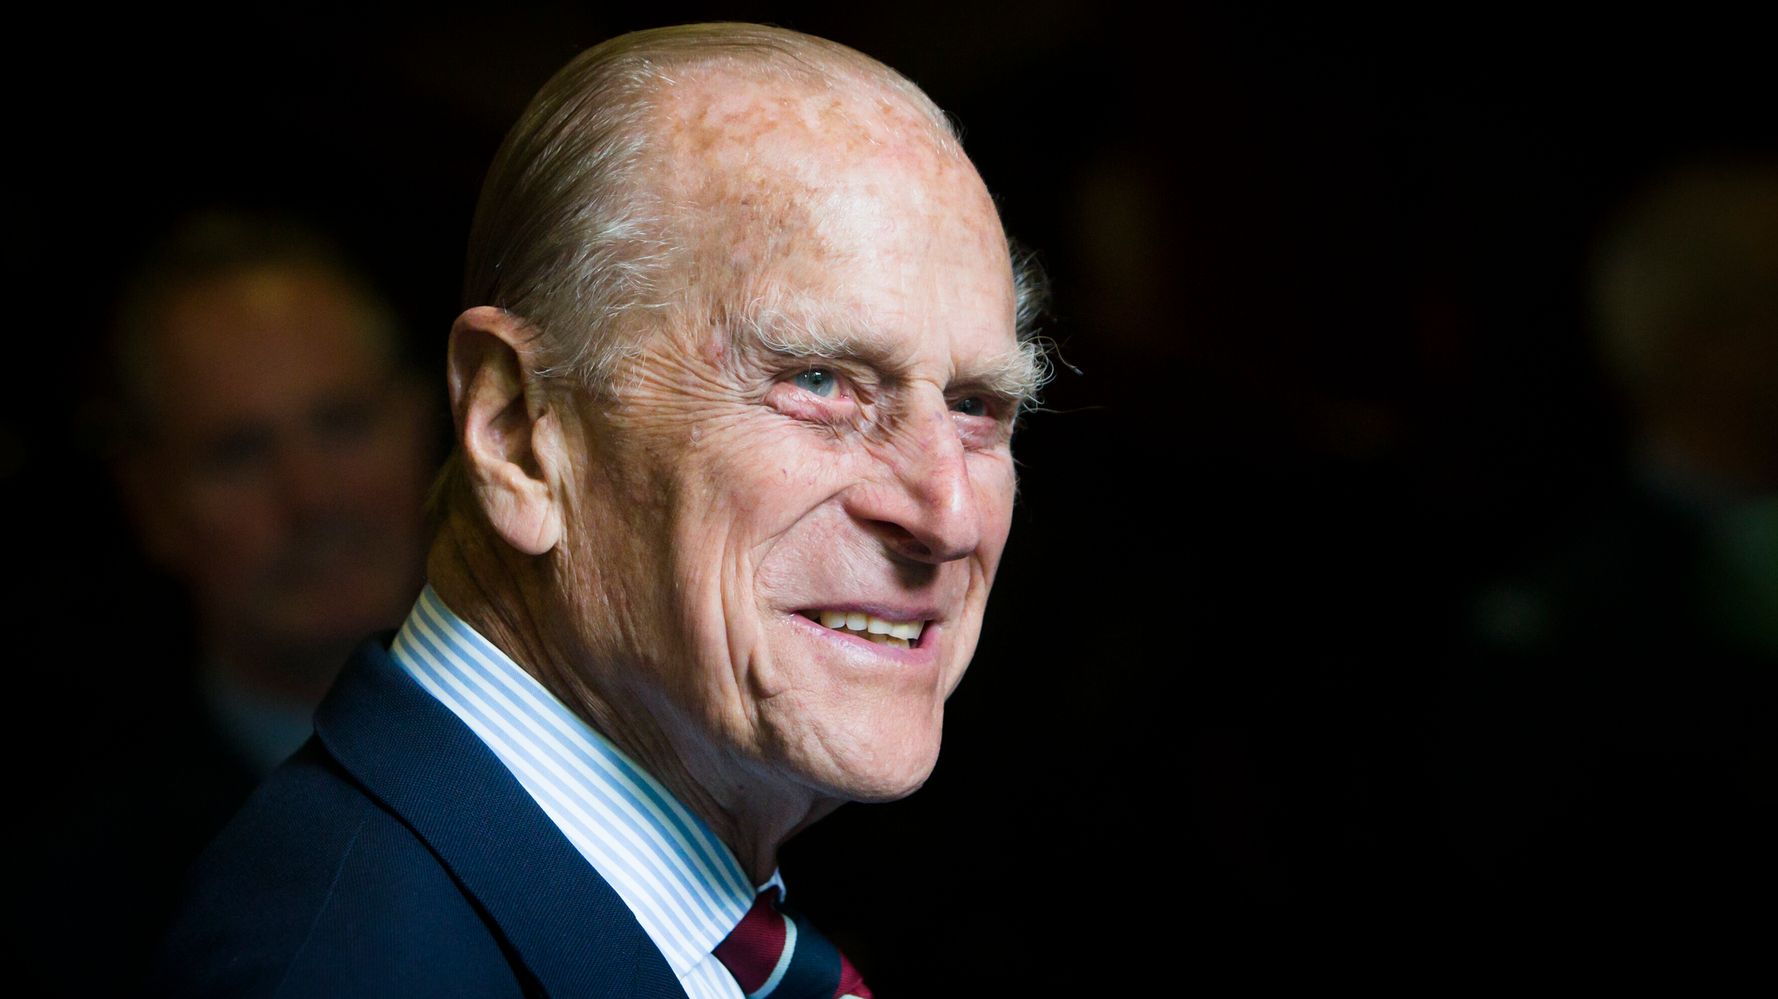 Prince Philip’s daughter-in-law, Sophie, Countess of Wessex, discusses his last moments